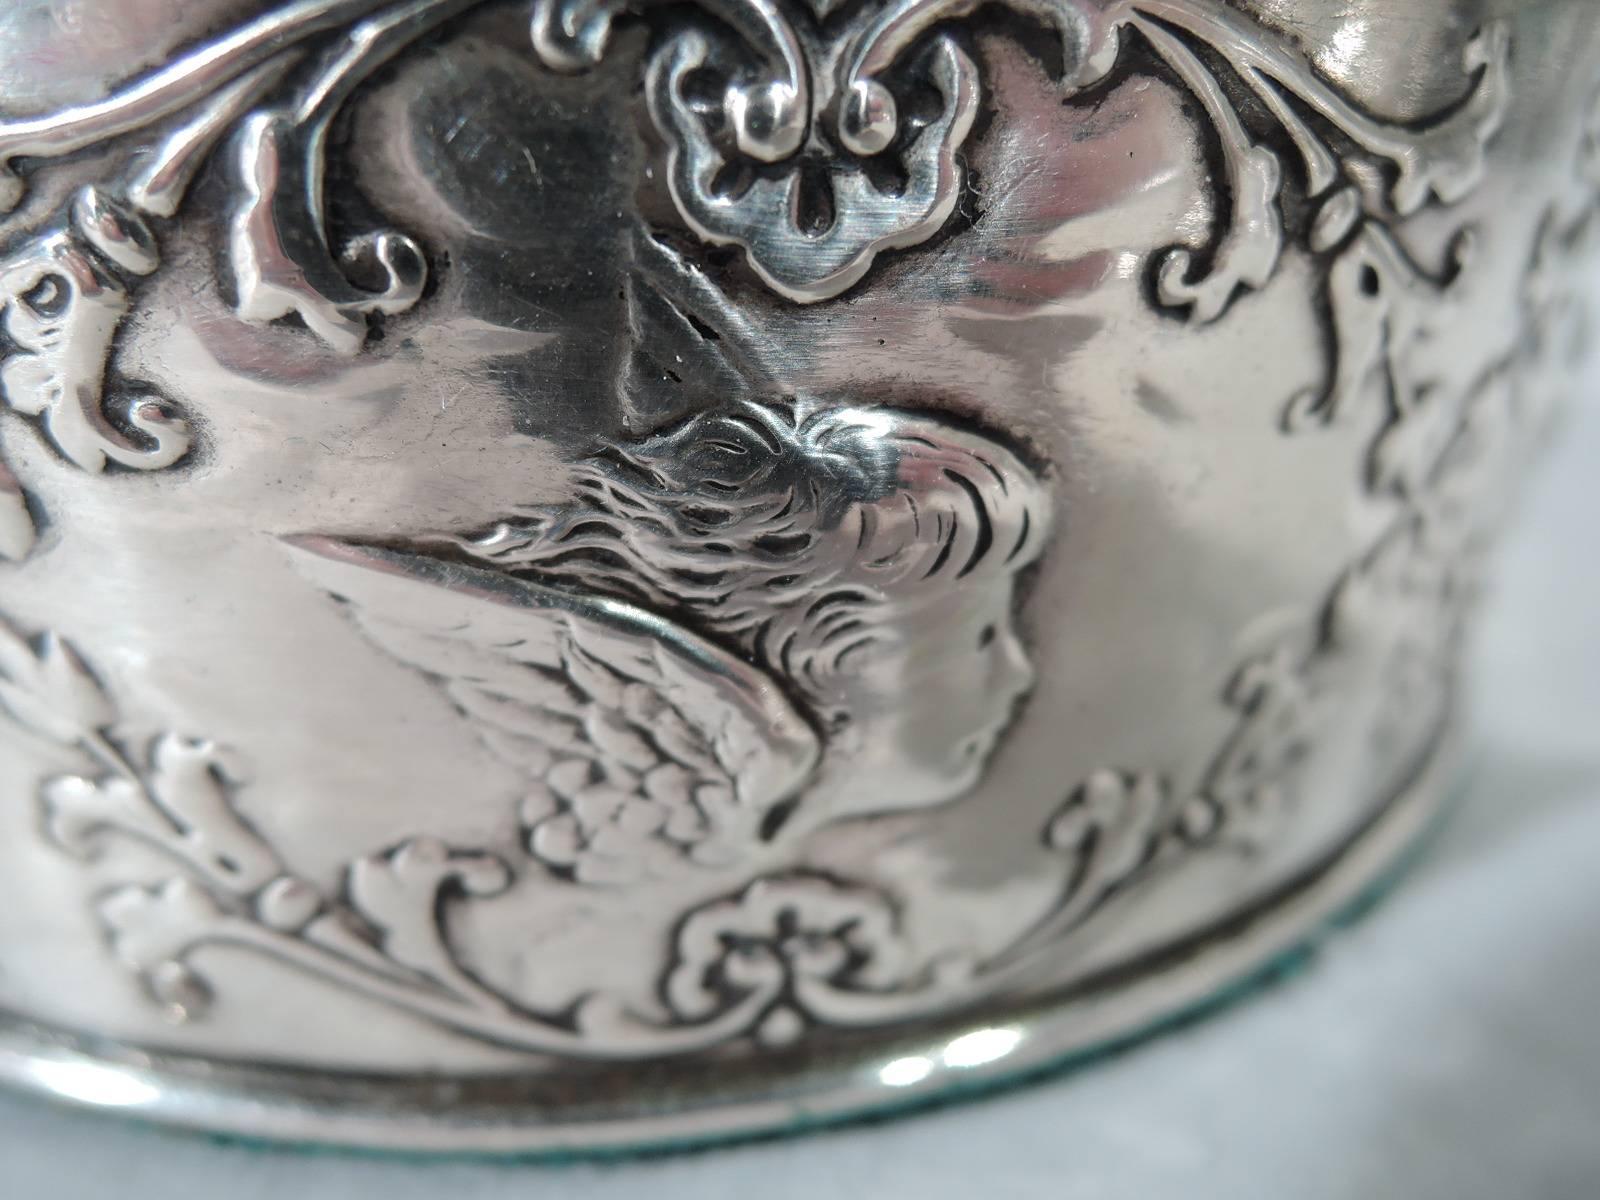 Edwardian sterling silver wine bottle coaster. Made by William Comyns in London in 1903. Straight sides and molded rims. Encircled with floral garland inset with winged cherub heads. Stained-wood well has central silver frame with engraved armorial.